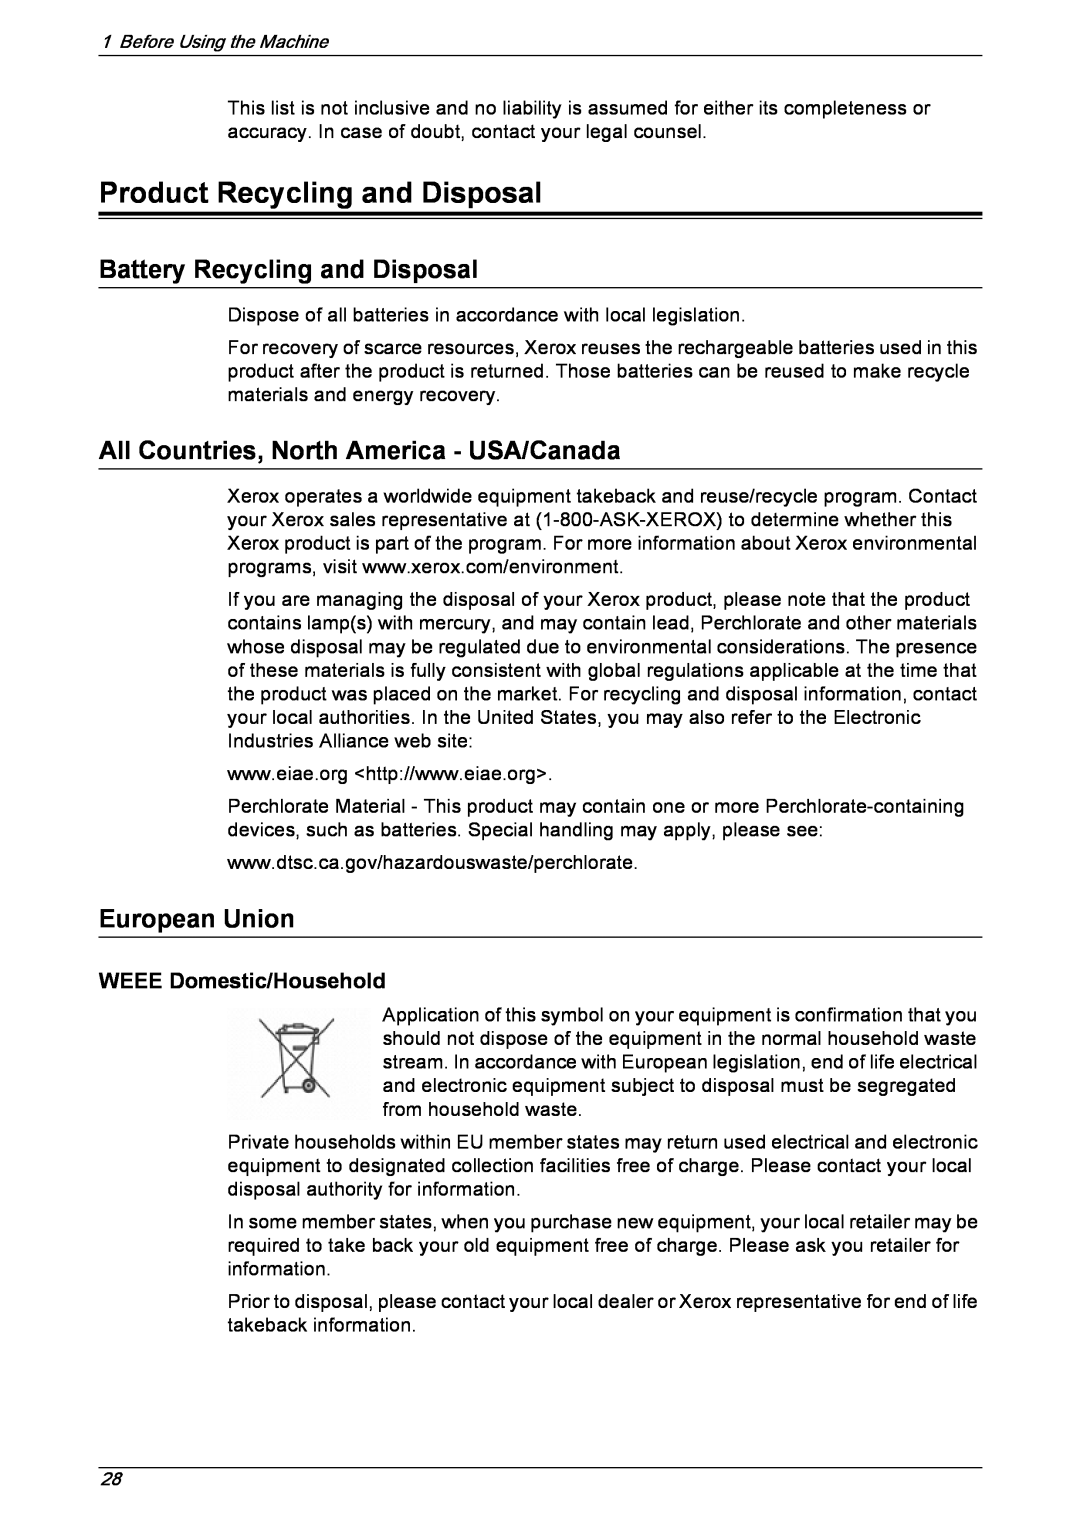 Xerox 5230 manual Product Recycling and Disposal, Battery Recycling and Disposal, All Countries, North America - USA/Canada 